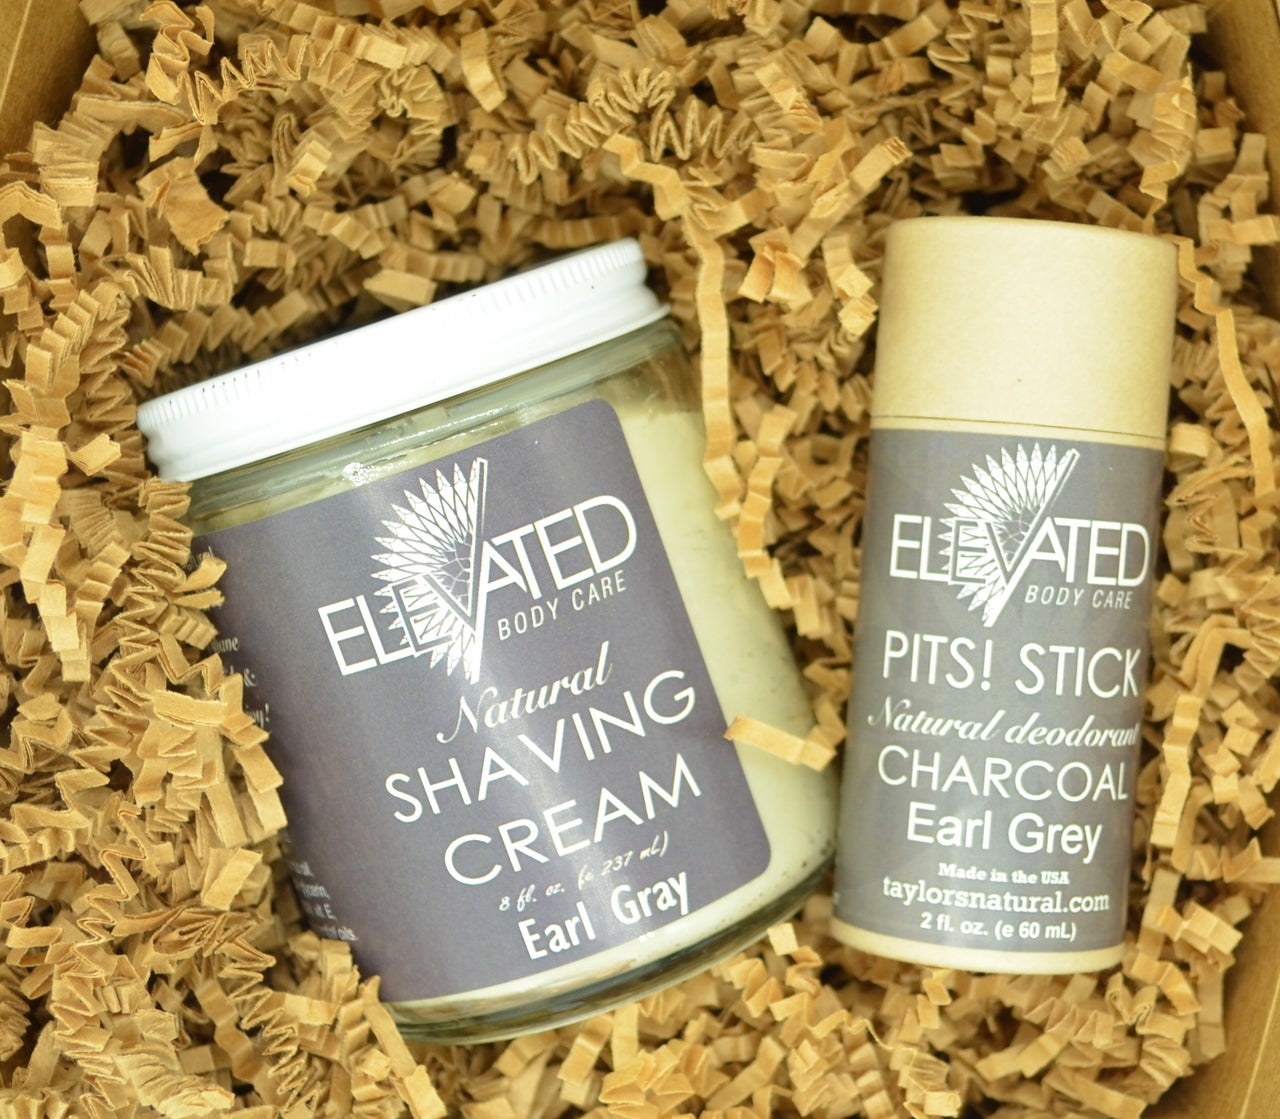 Biodegradable STICK Deodorant + 8oz. Shave Cream in Earl Gray in a Zero-Waste, eco Box with crinkle.